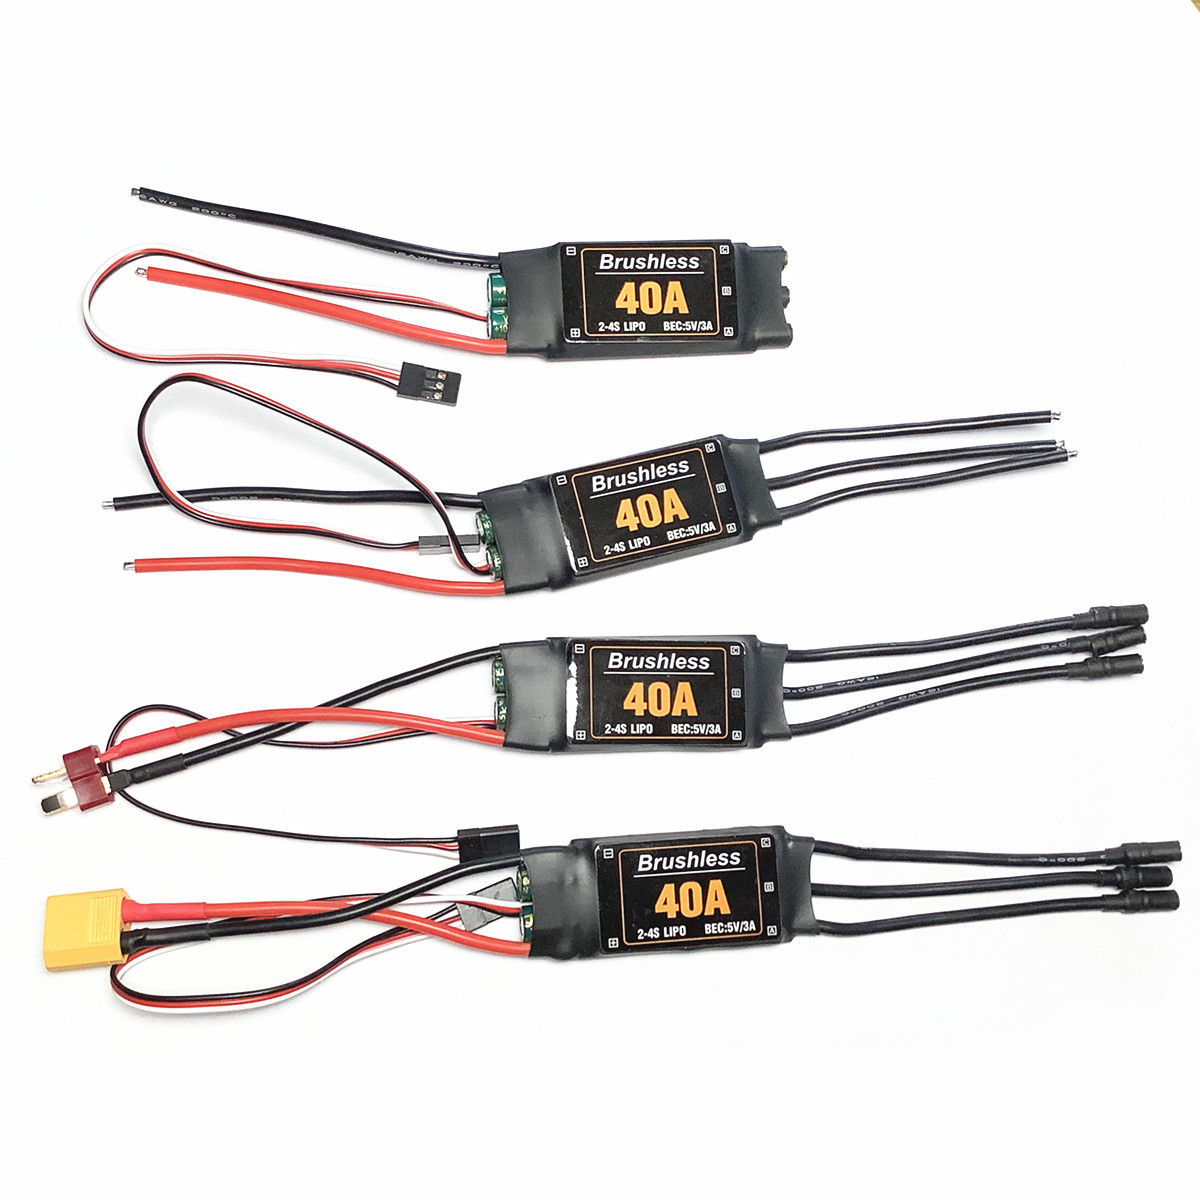 40A Brushless ESC Drone Airplanes Parts Components Accessories Speed Controller Motor RC Toys FPV Durable Quadcopter Helicopter